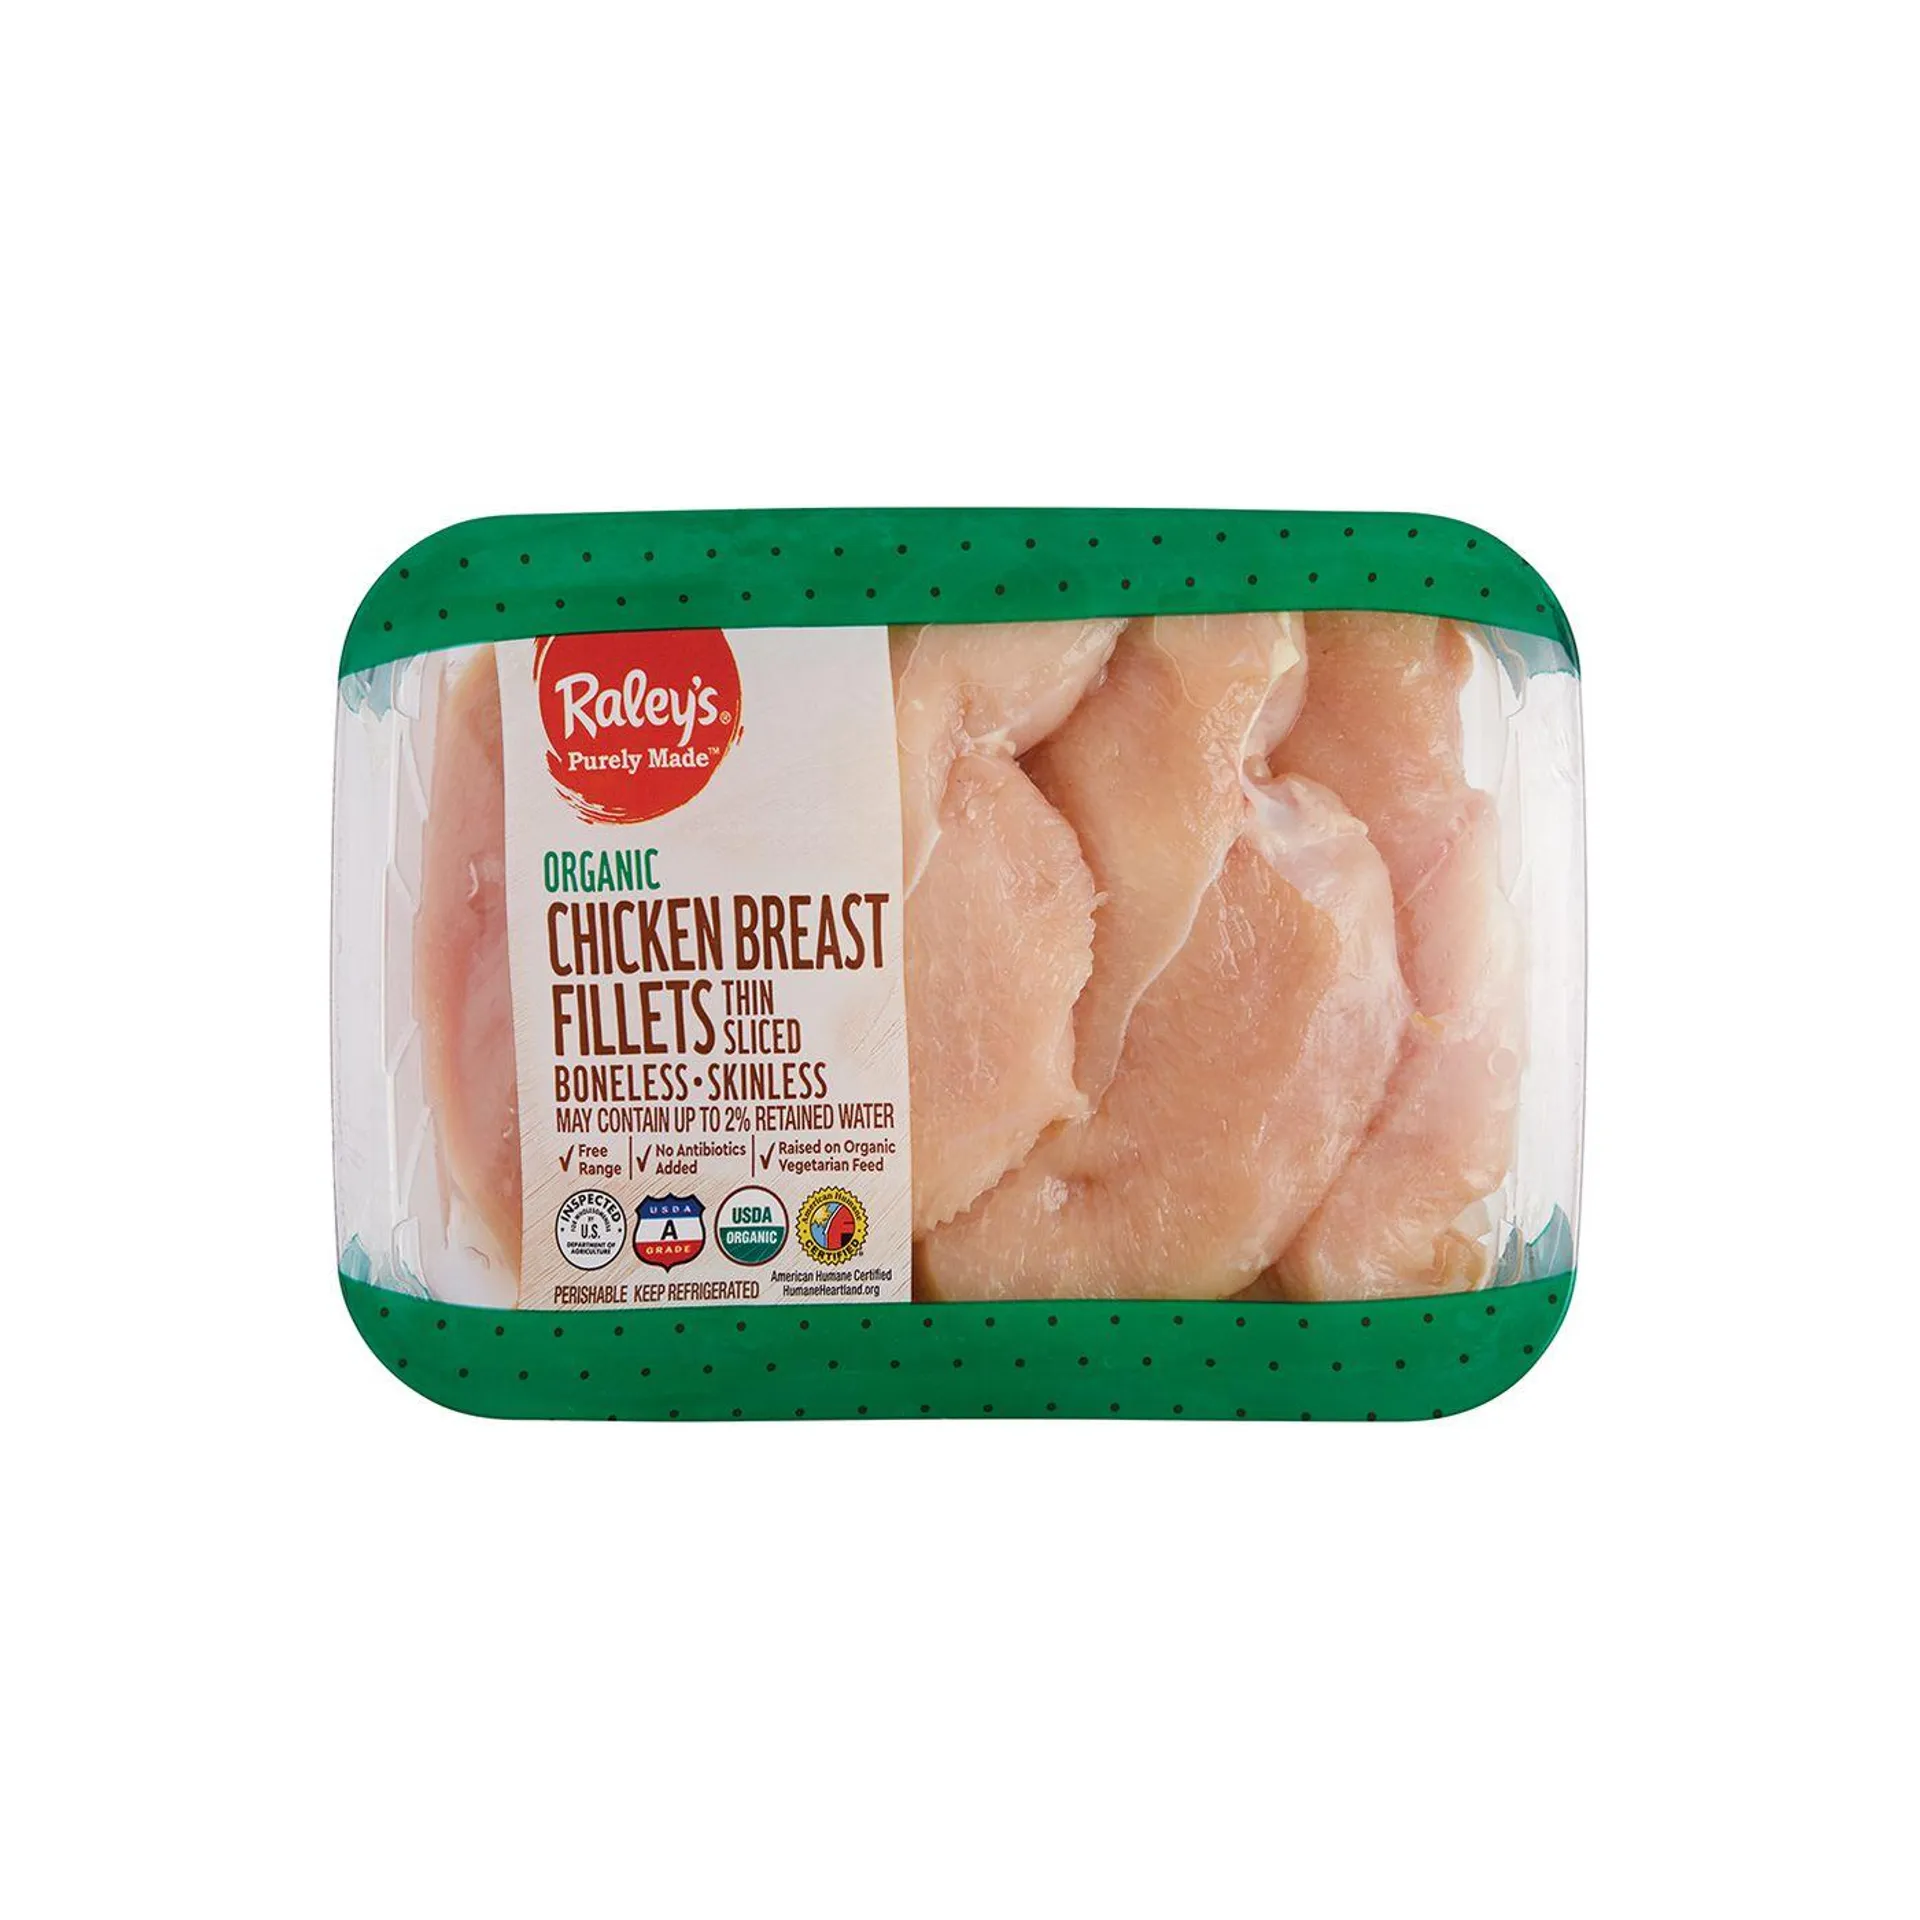 Raley's Purely Made Organic Boneless Skinless Chicken Breast Fillets Thin Sliced